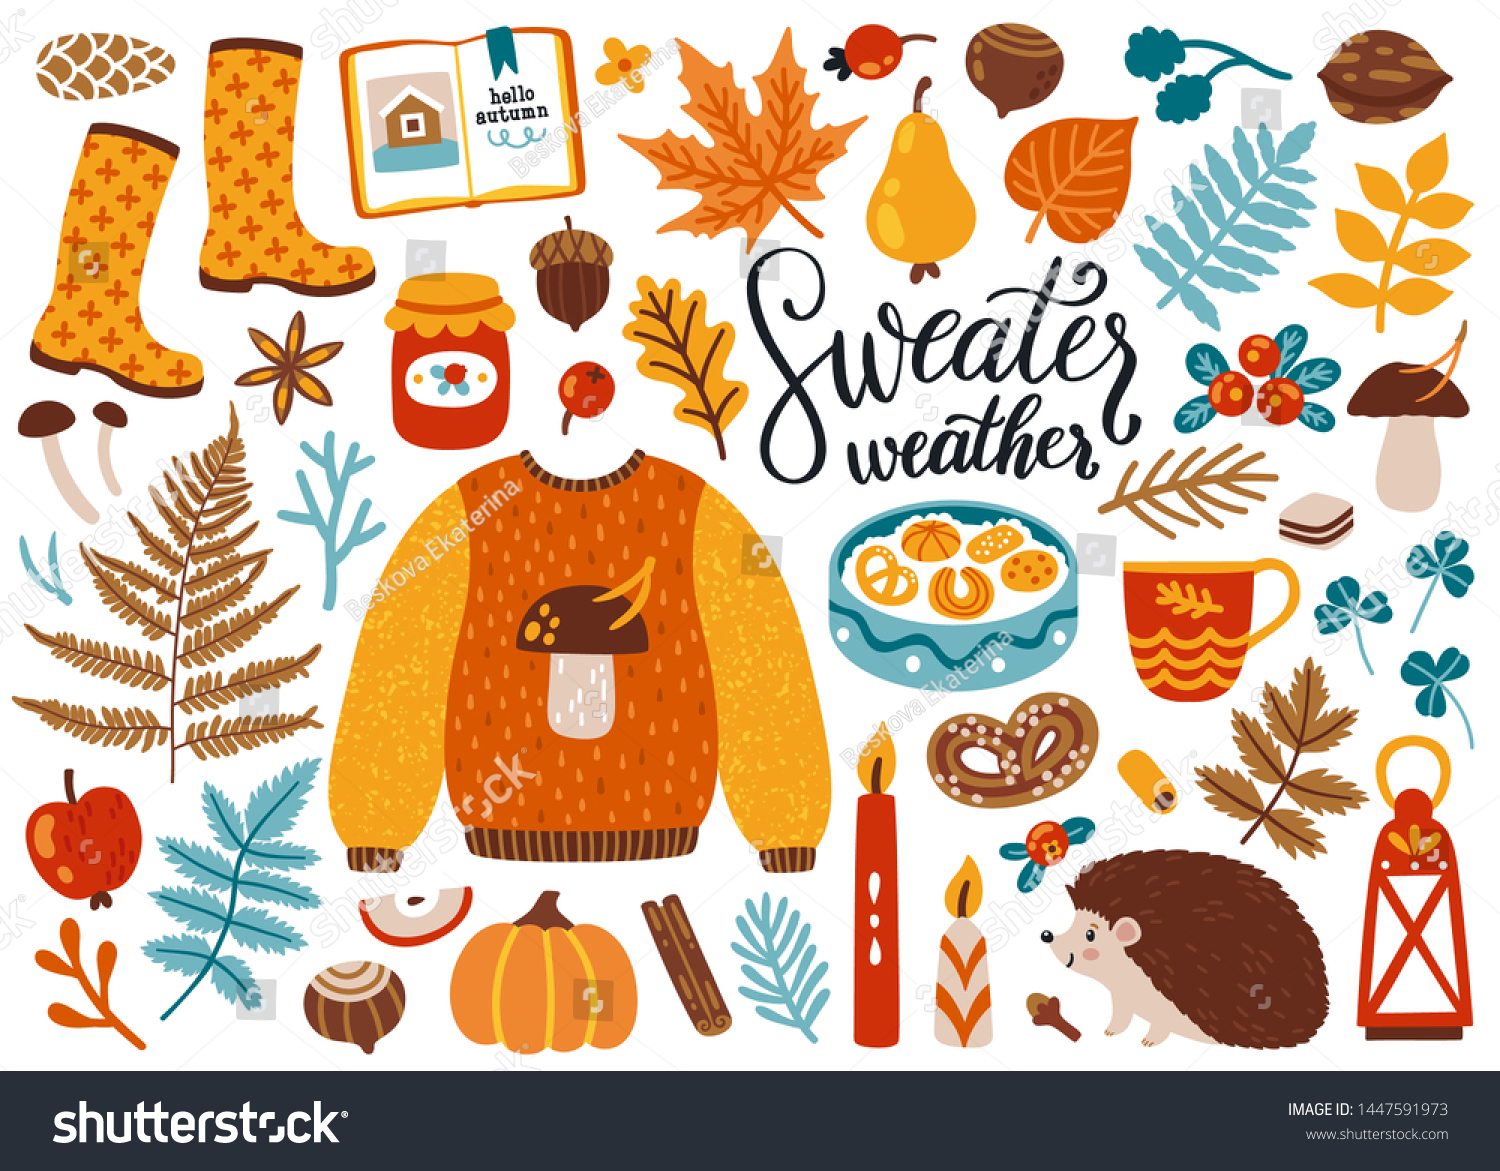 Vector set of autumn icons: sweater, falling leaves, cozy food, candles, book and cute hendgehog. Scrapbook collection of fall season elements. Bright background for harvest time. Autumn greeting card #1447591973